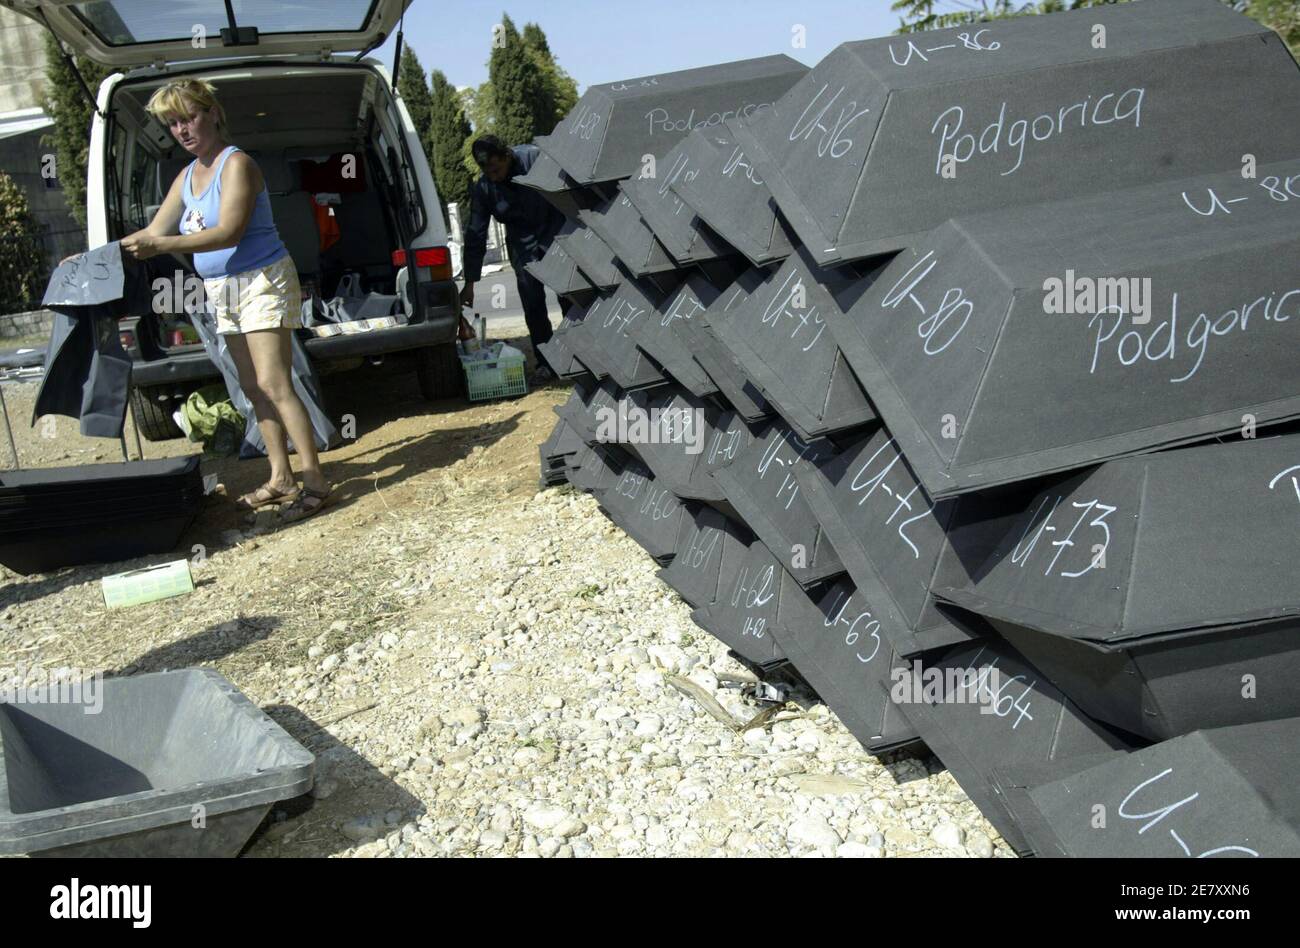 A woman staples shut cardboard coffins containing the remains of German WWII soldiers in Podgorica September 18, 2007. Montenegrin authorities in cooperation with a German agency this week began the excavation of a site believed to contain the remains of several hundred German soldiers who were buried there by their comrades in World War Two. Picture taken September 18, 2007.   REUTERS/Stevo Vasiljevic (MONTENEGRO) Stock Photo